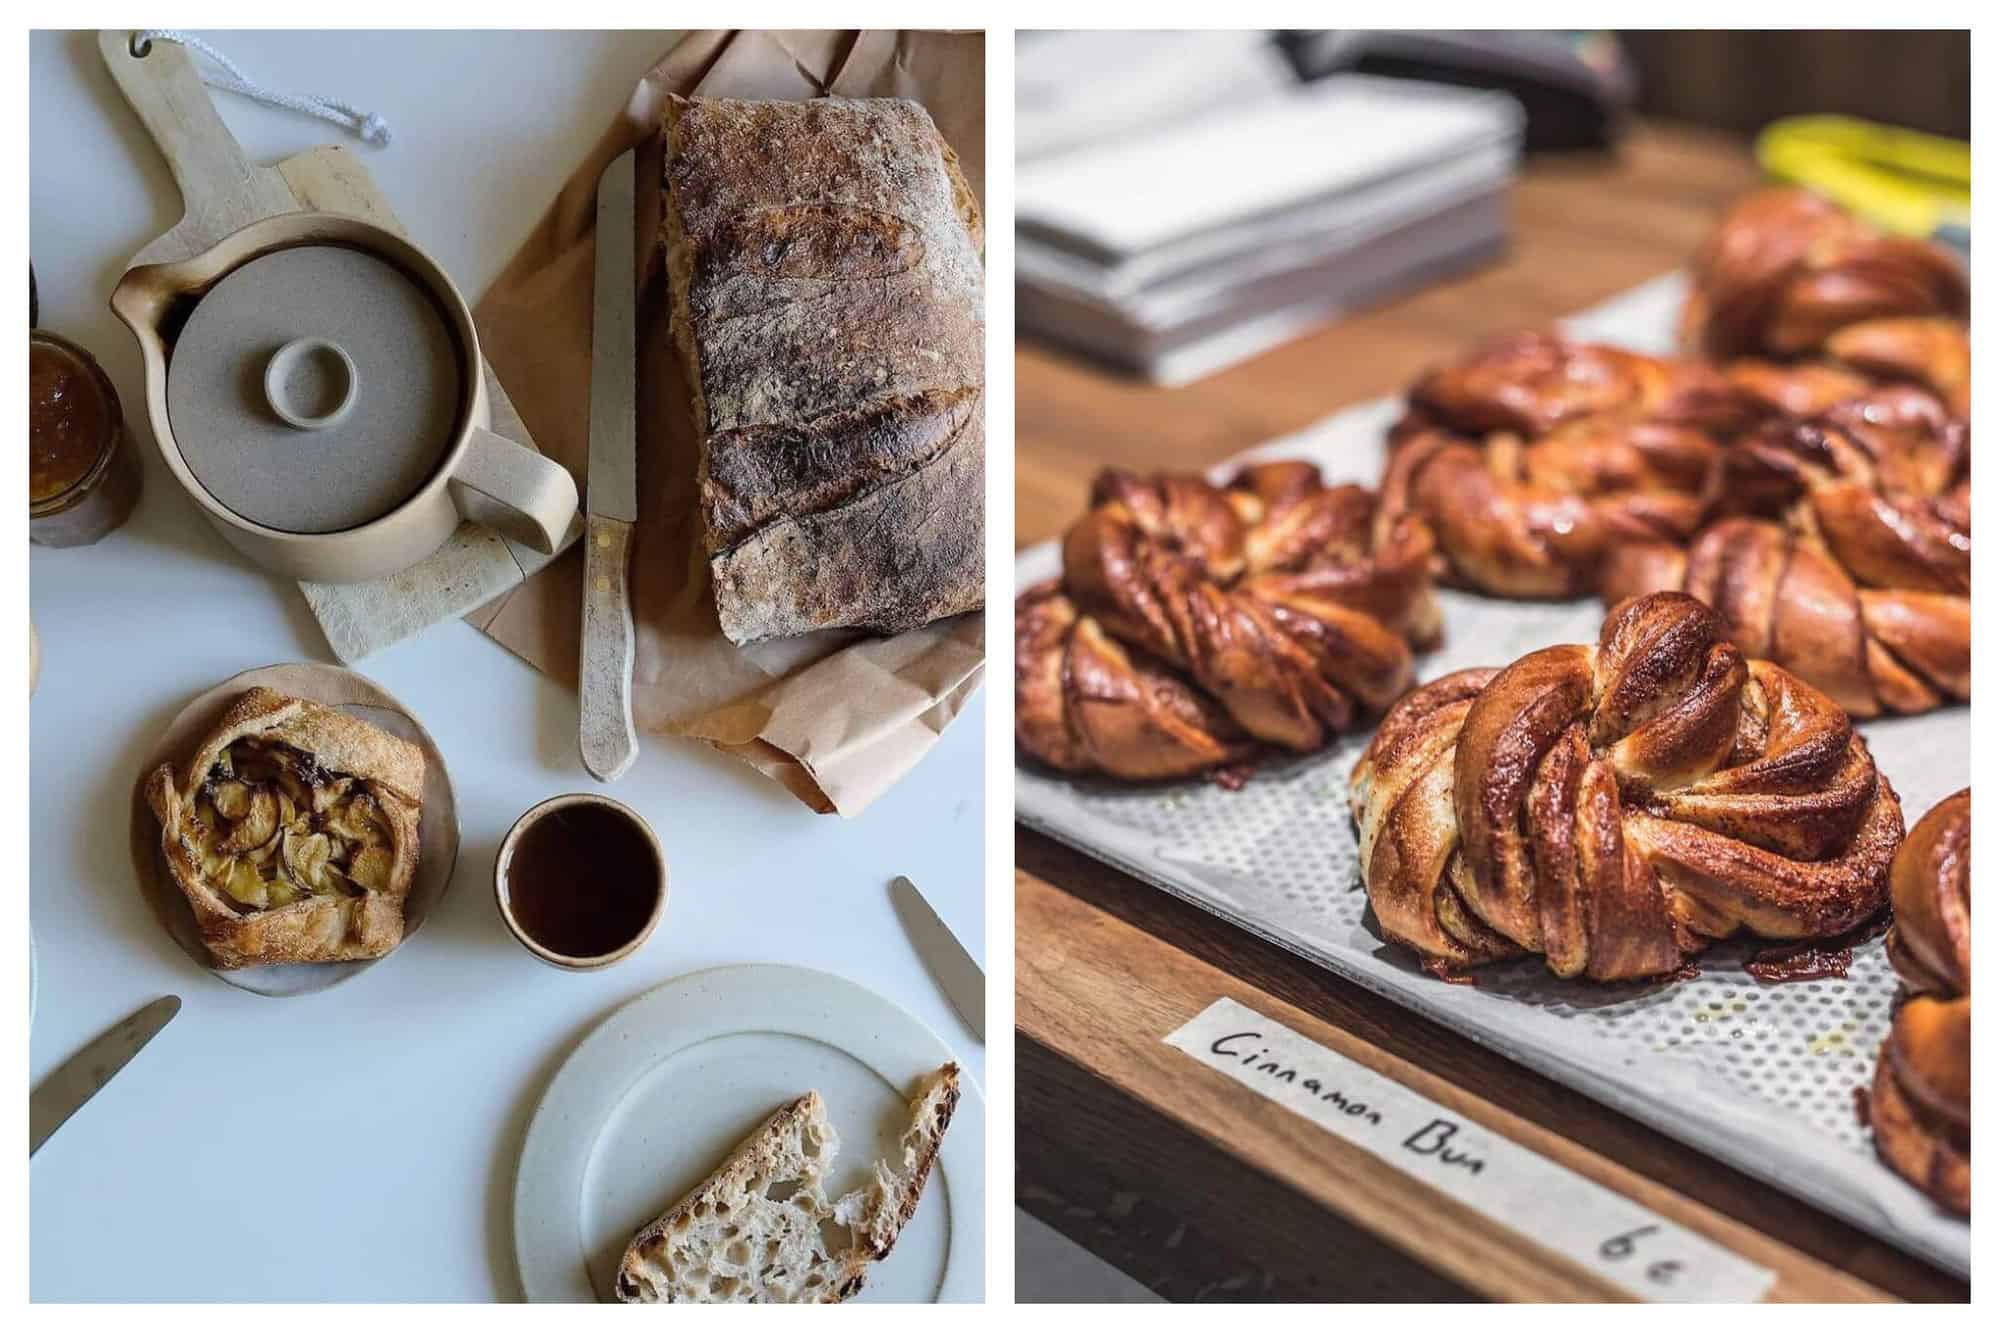 Left: a table with a tea kettle sitting on a cutting board, a cup with tea in it, a large loaf of bread with a knife next to it, a small plate with a slice of bread on it, and an apple tart. Right: A display with several cinnamon buns with a small piece of tape with "cinnamon buns 6€" written on it.   